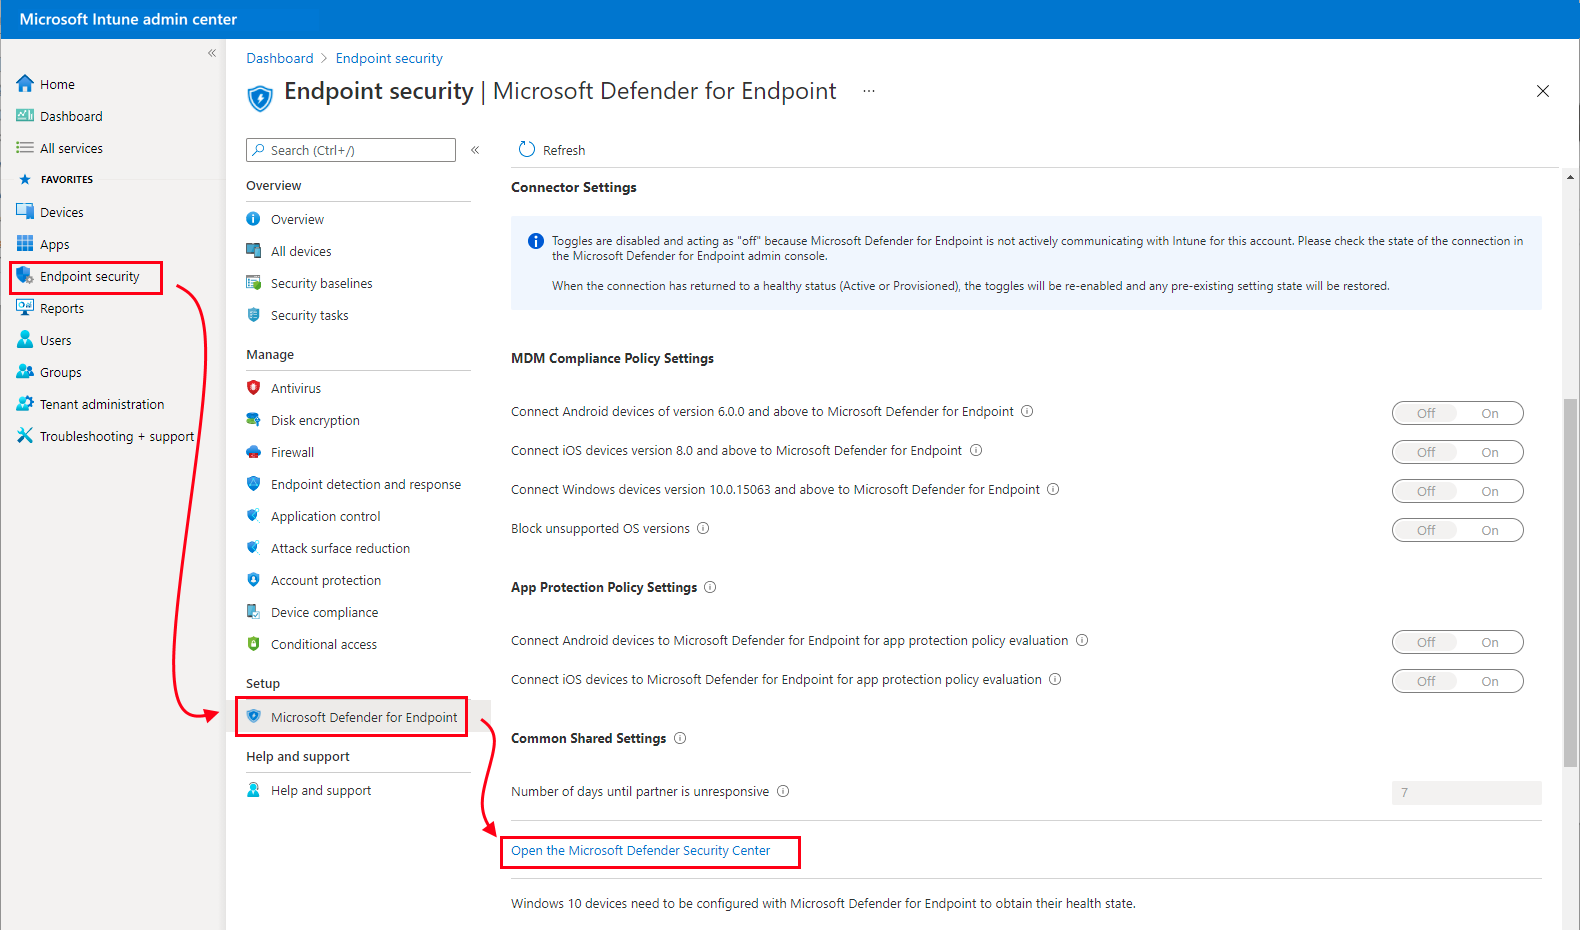 Go to the To Do settings or preferences.
Ensure that the integration with Microsoft To Do is properly configured and enabled.